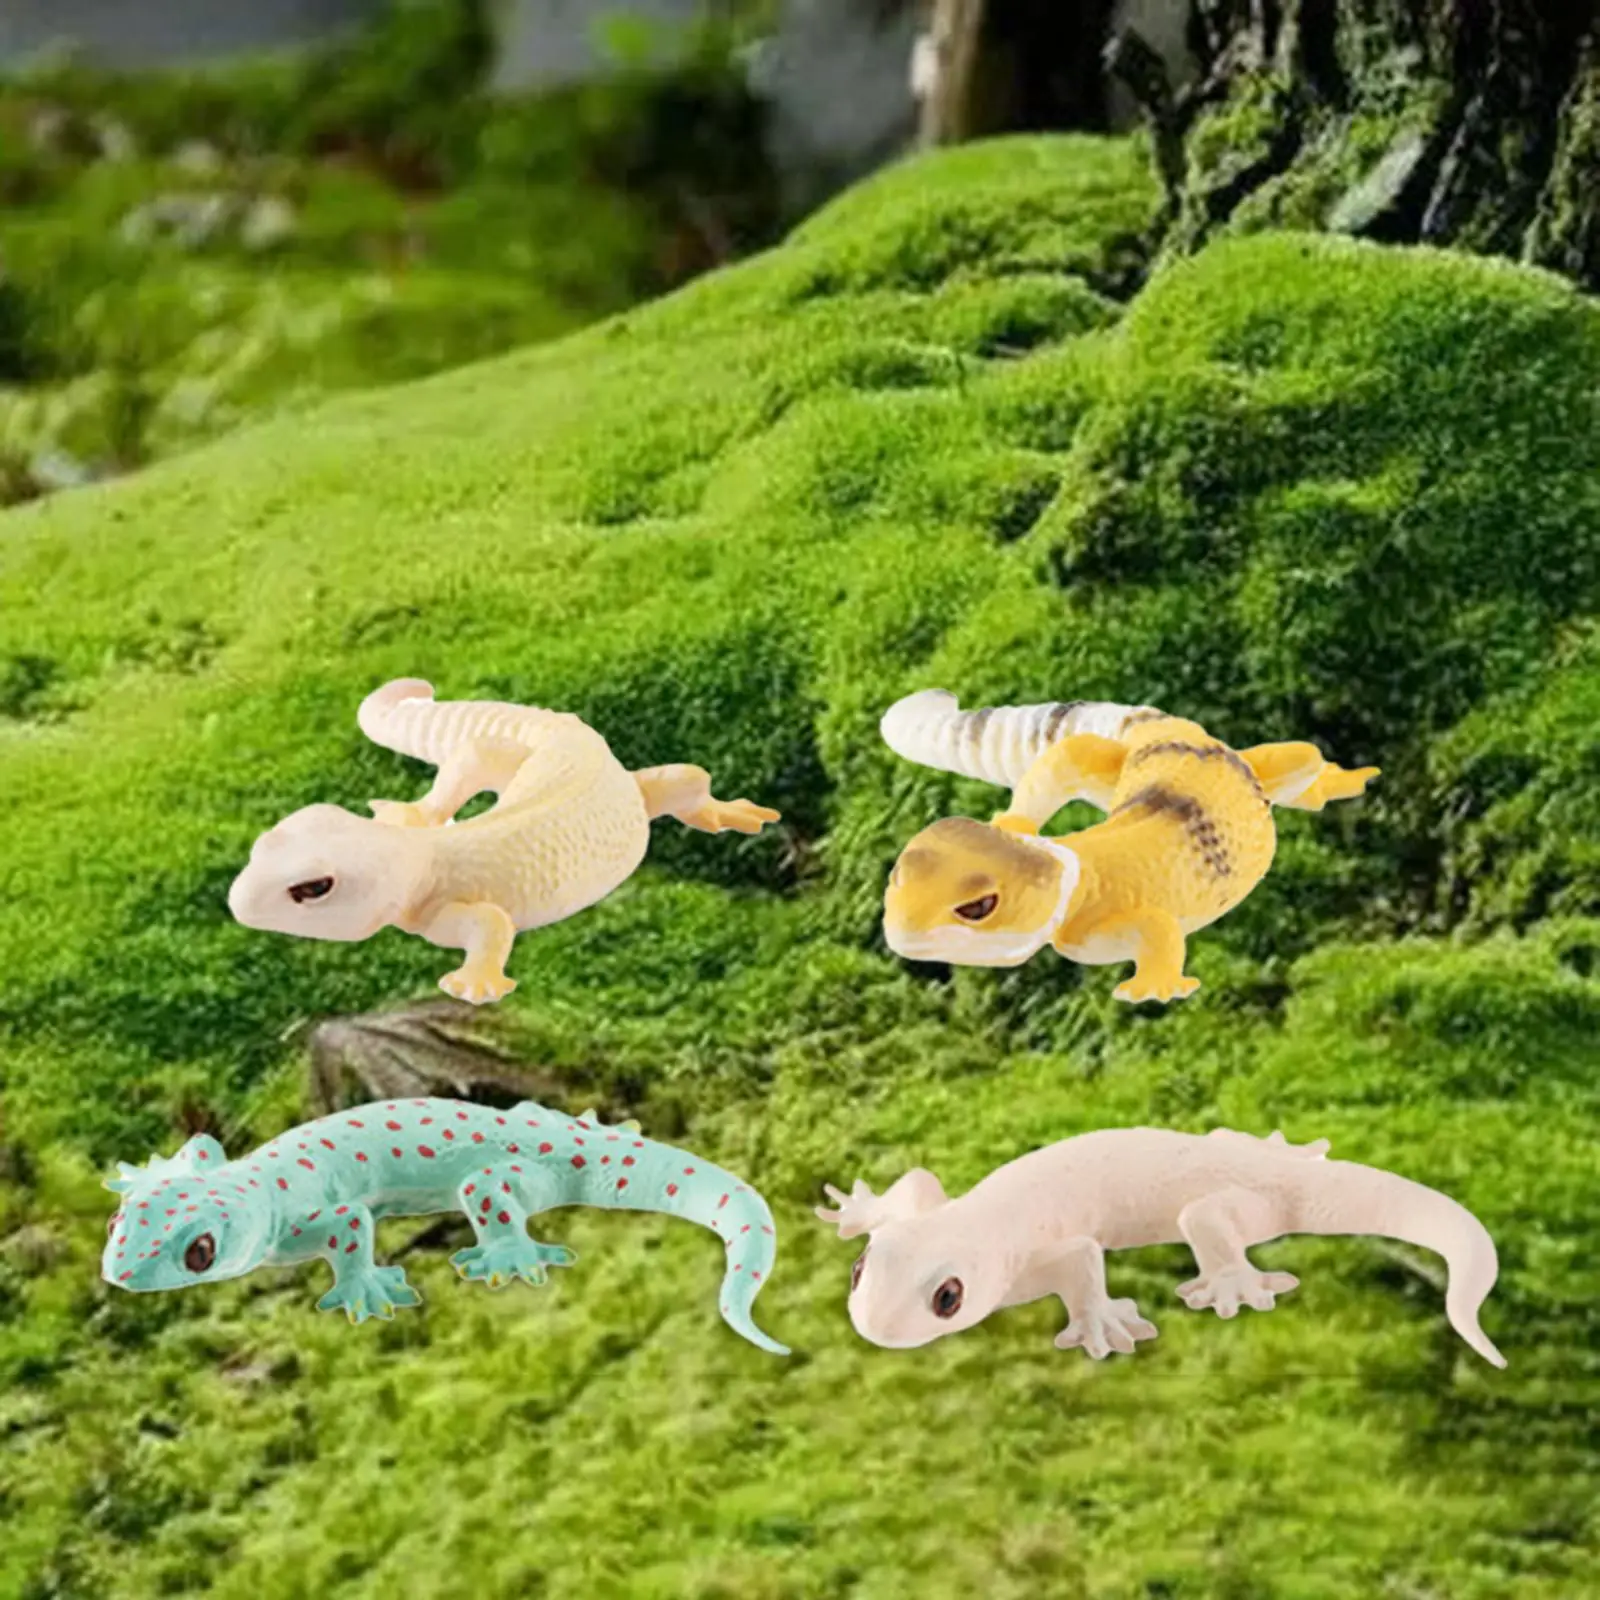 4Pcs Animals Model Decorations Cognition Toy Gifts Lizards Toy for DIY Projects